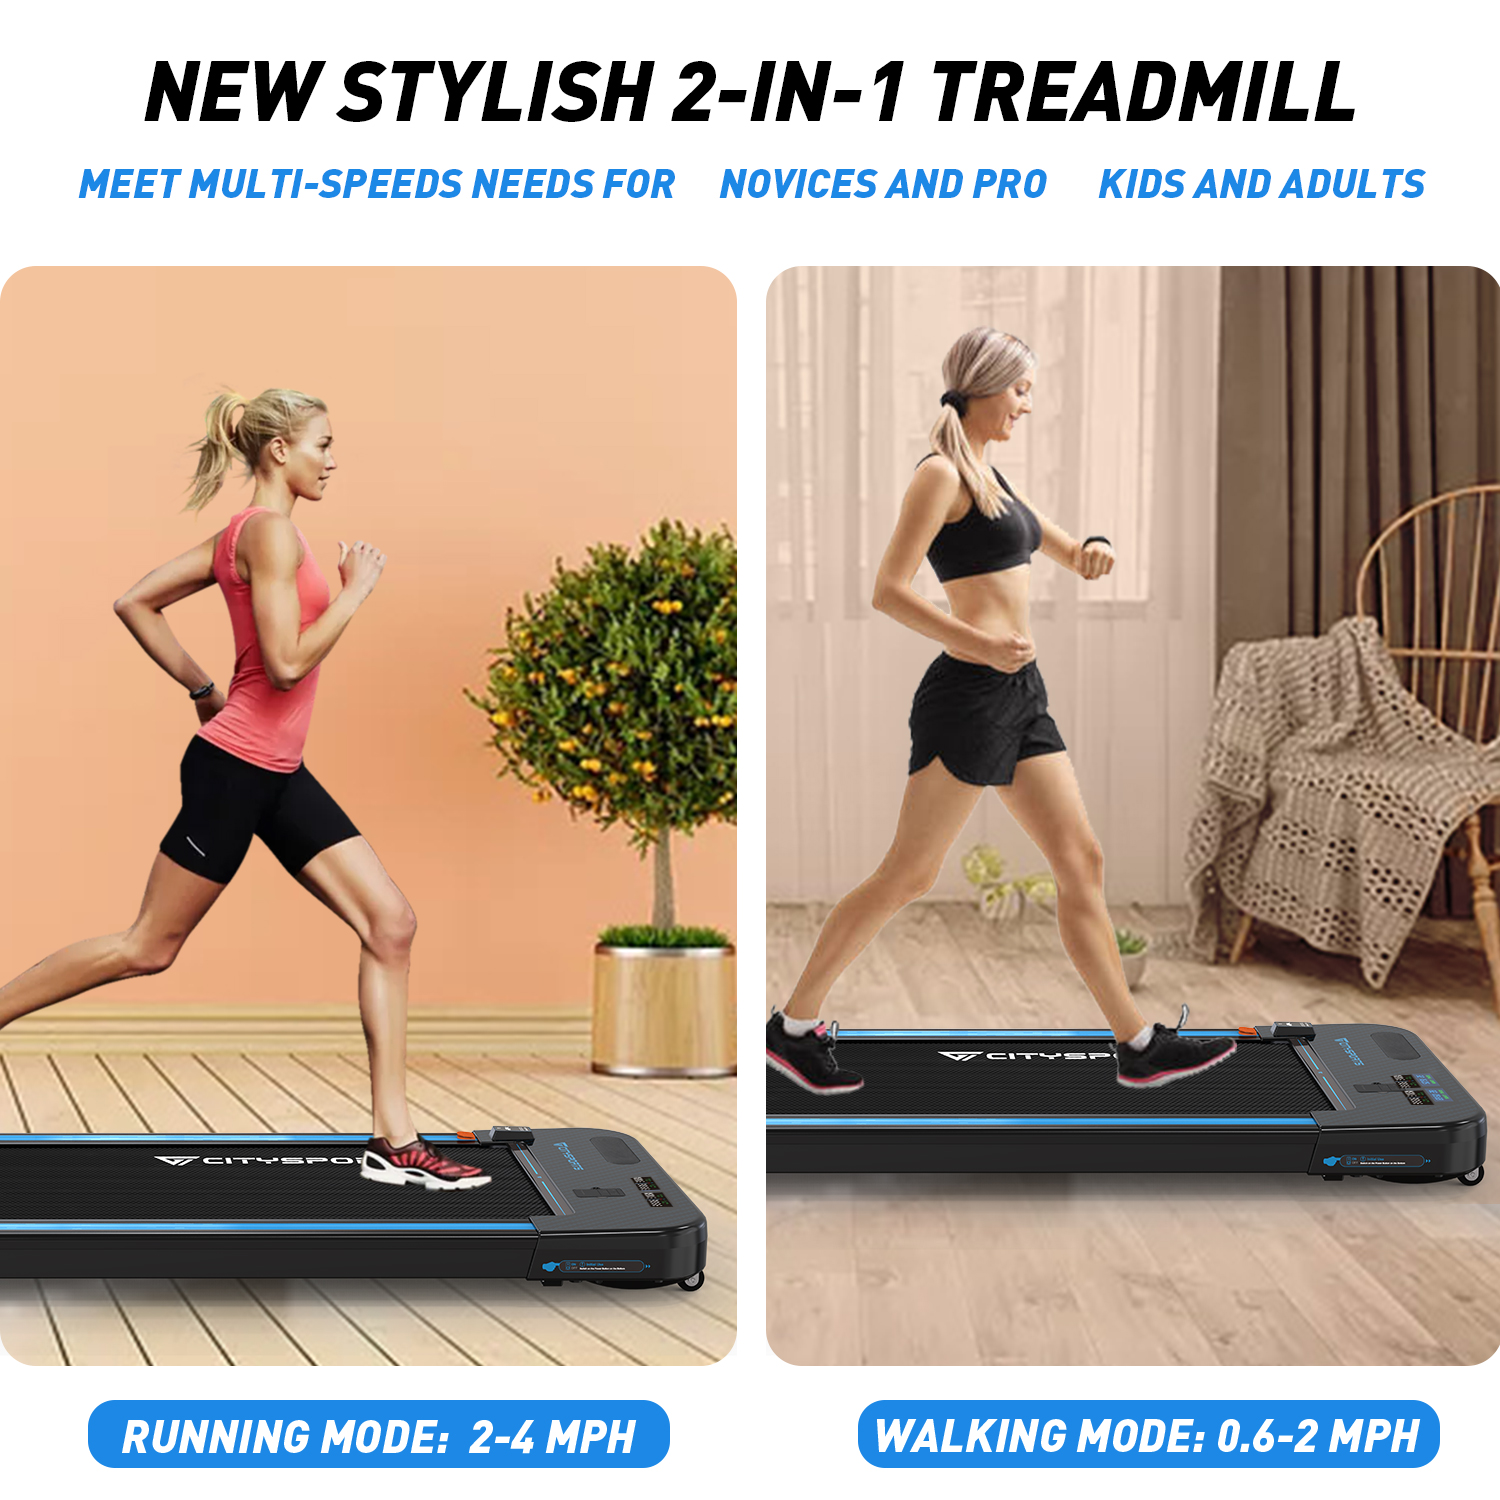 Gearstone Treadmills for Home, CITYSPORTS Walking Pad Treadmill with Audio Speakers, Slim & Portable - image 2 of 7